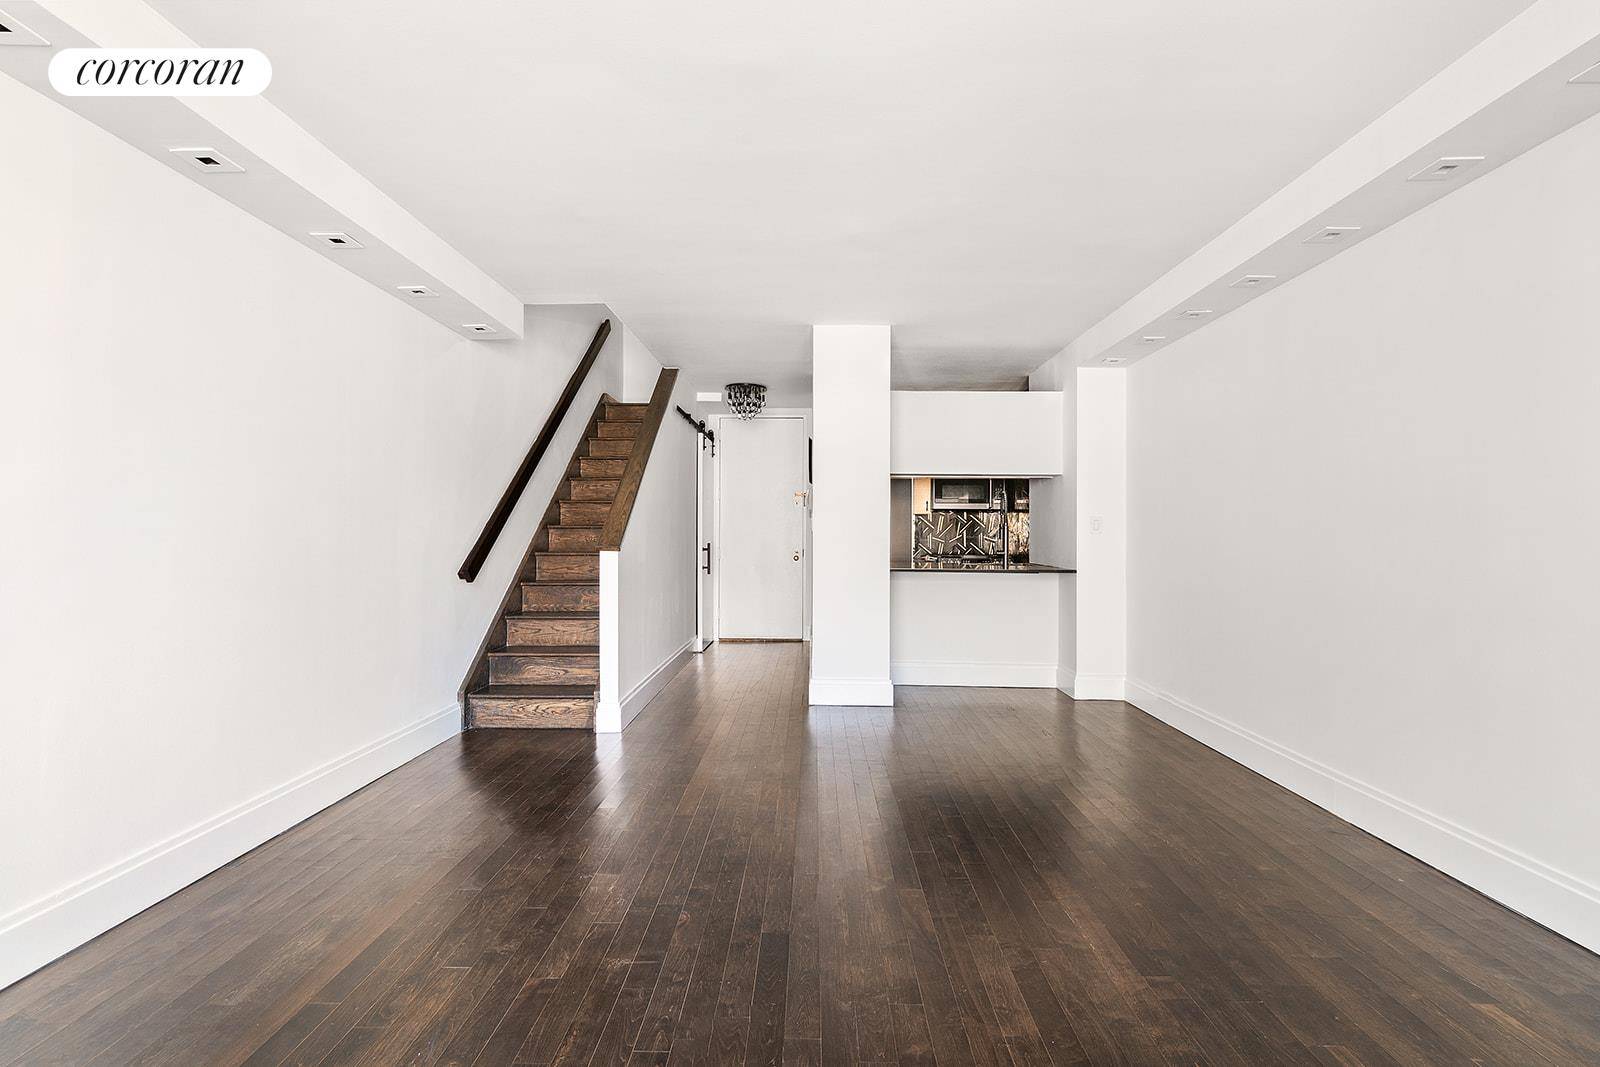 This spacious one bedroom Duplex has wood floors throughout, 12ft ceilings amp ; LED recessed lighting with dimmers.